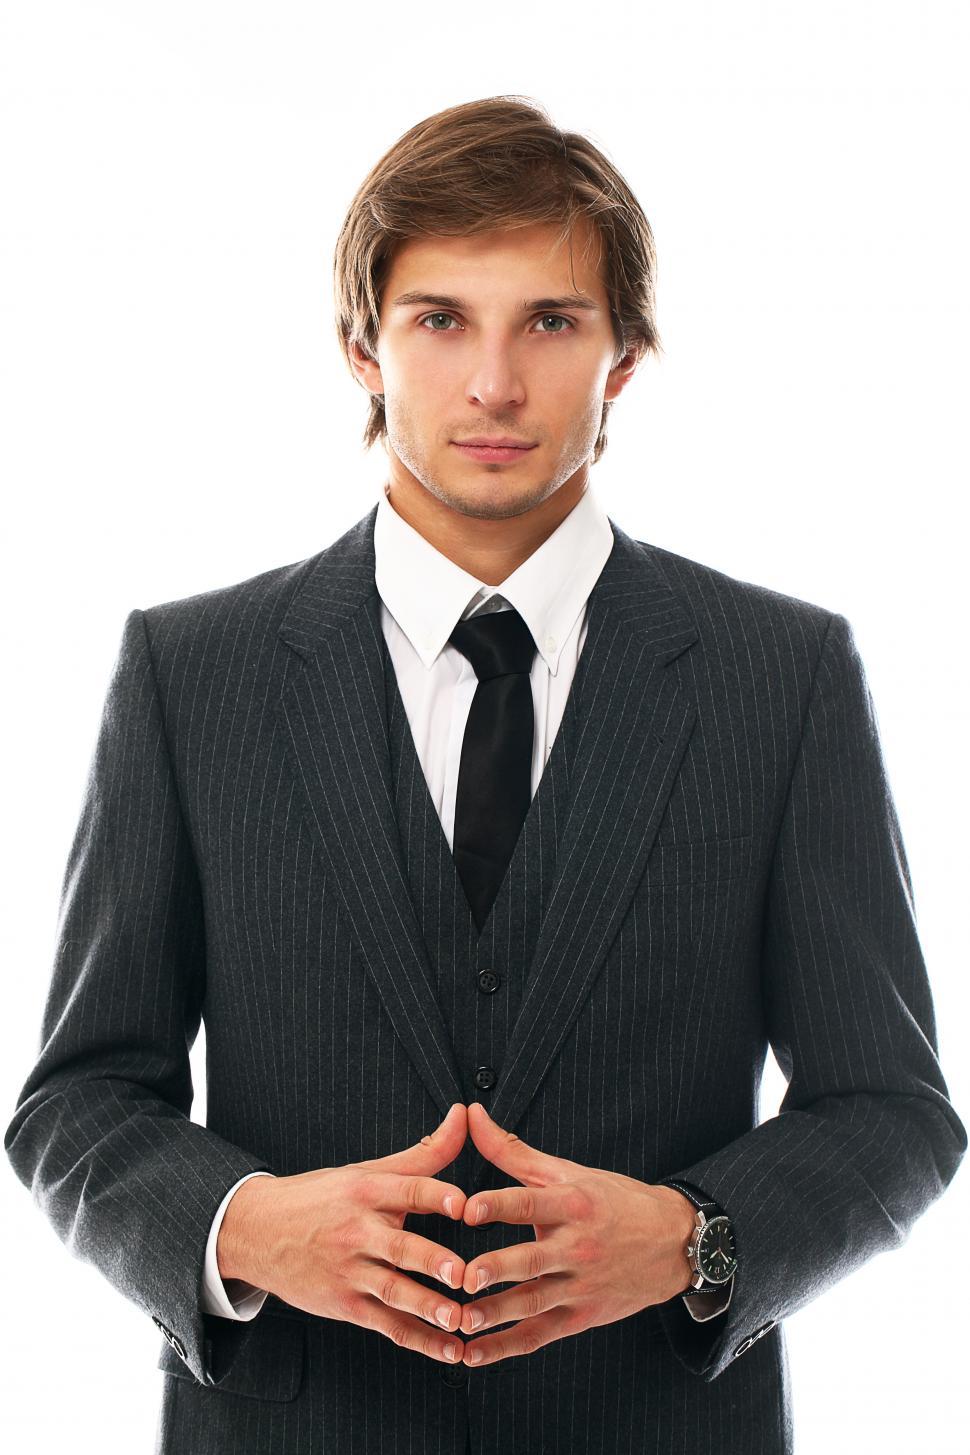 Free Image of Attractive businessman standing facing camera 